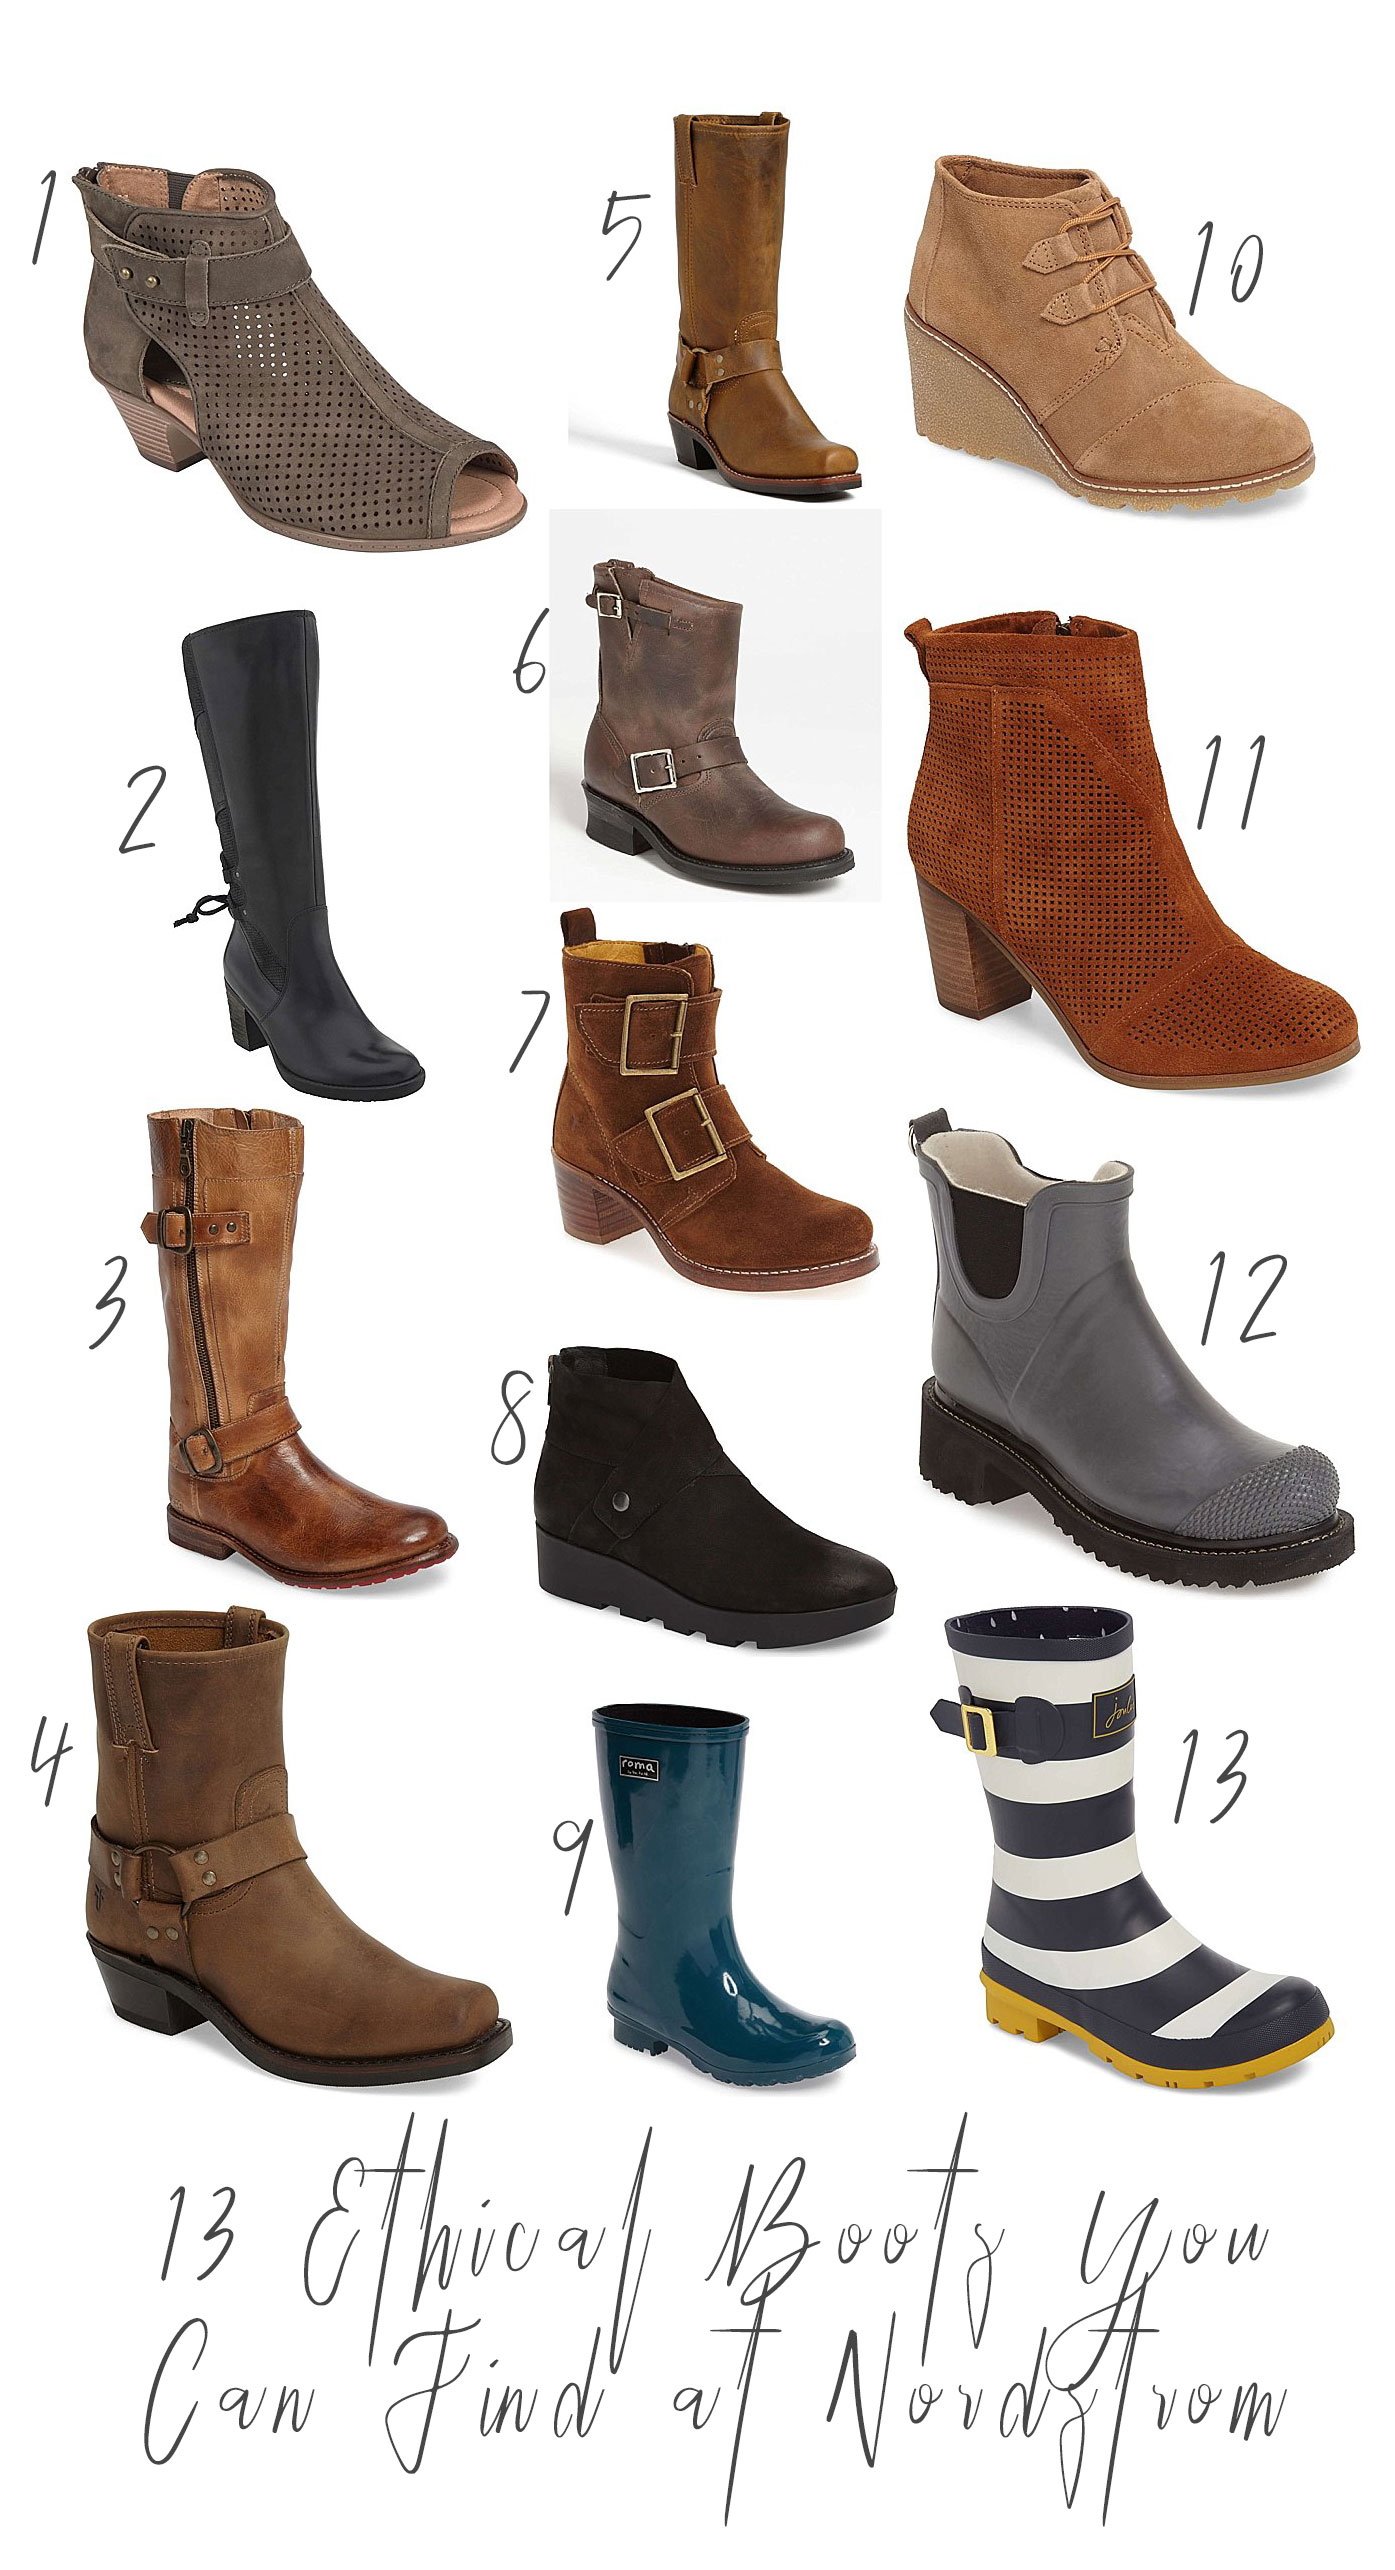 13 Ethical Boots You Can Find at Nordstrom featured by popular North Carolina ethical fashion blogger, Still Being Molly